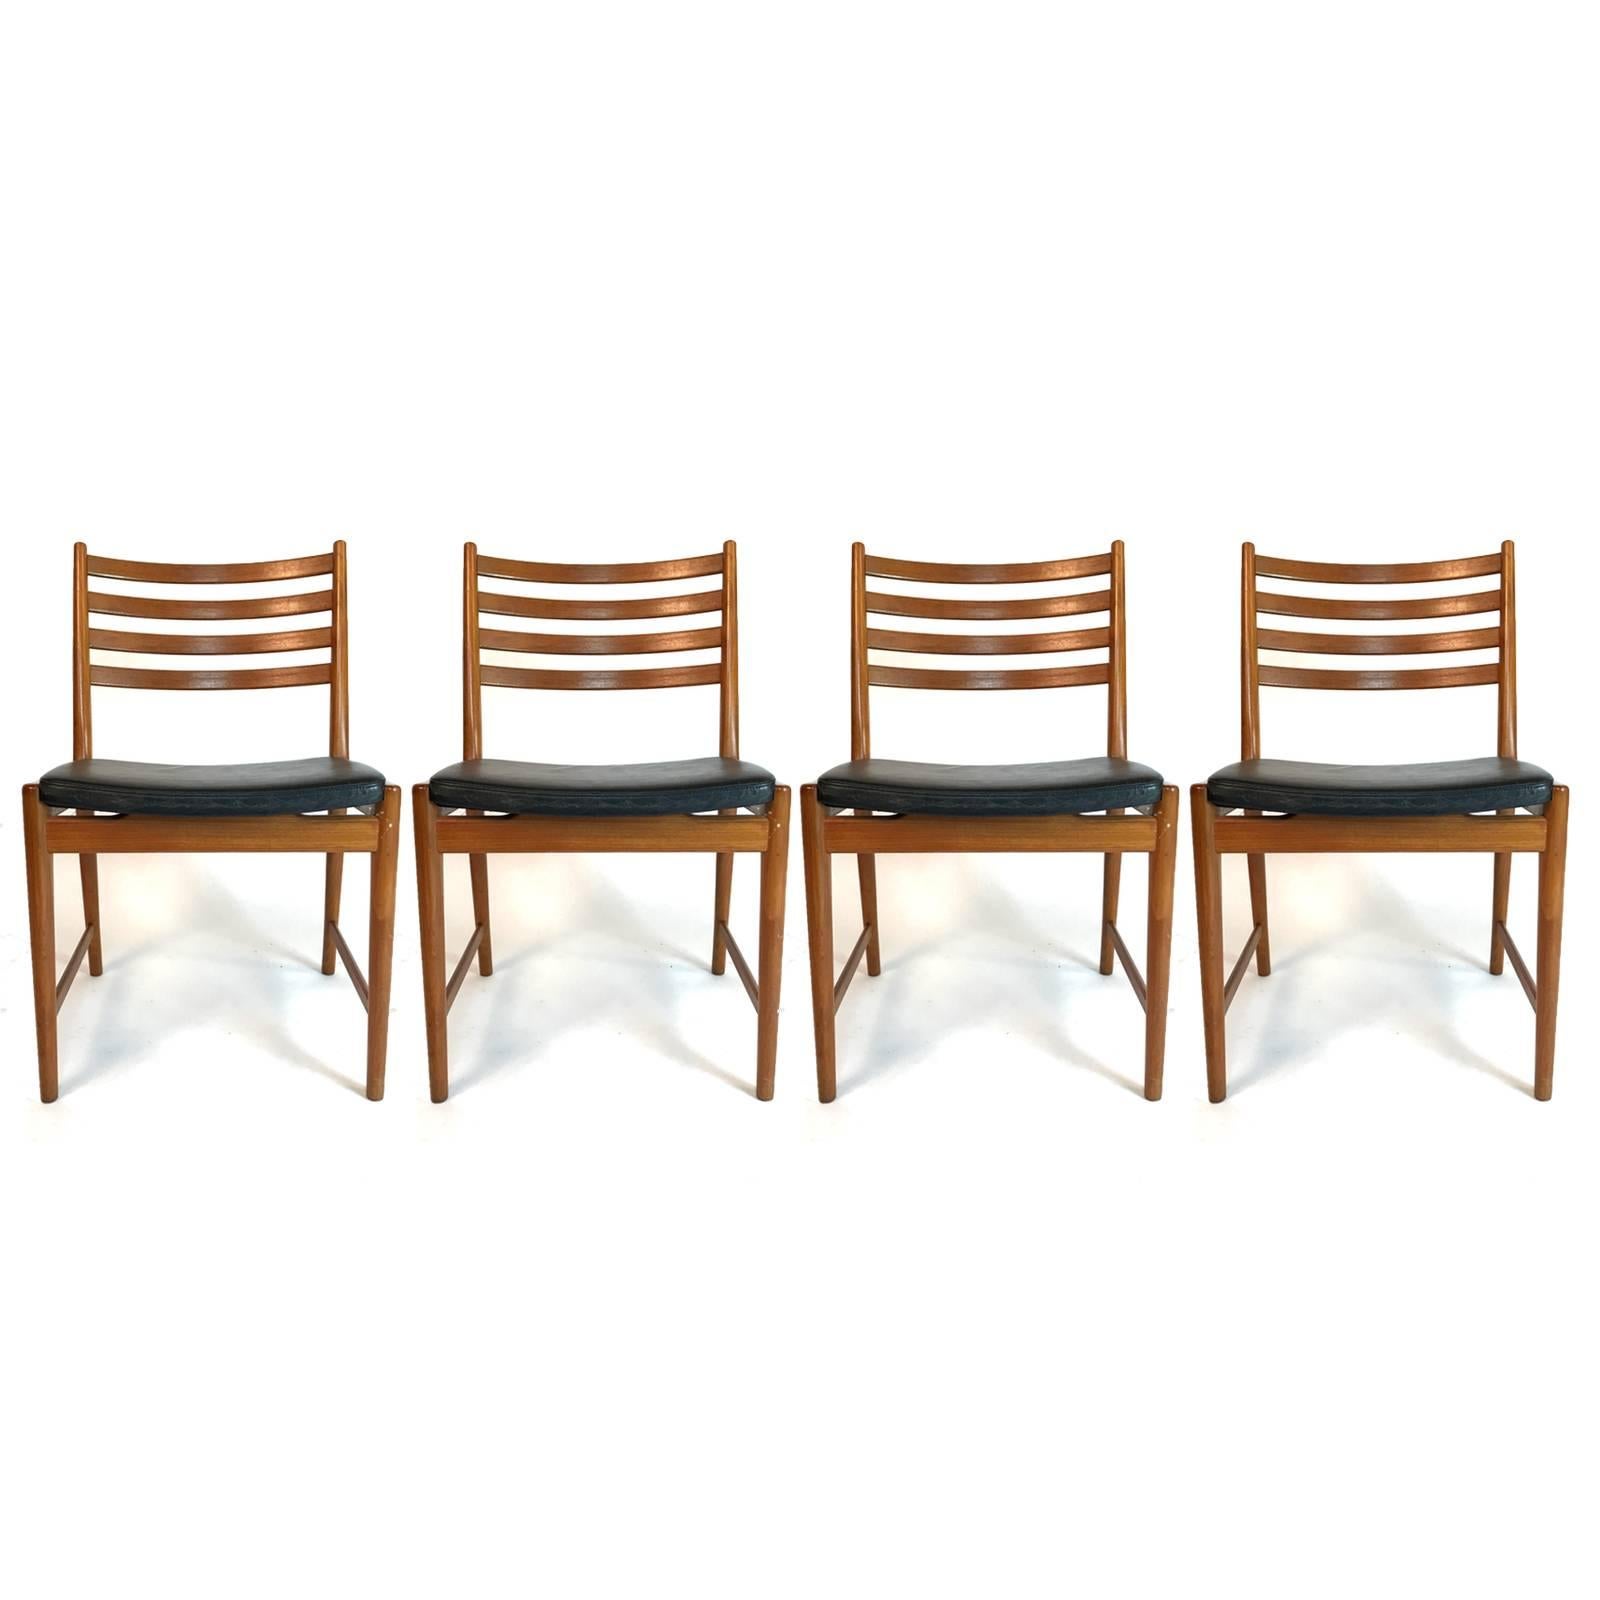 Stunning set of two armchairs and four side chairs in teak and leather by Kai Lyngfeldt Larsen. Armchairs measure: 24.25 wide x 20 deep x 31 high. Seat height 17